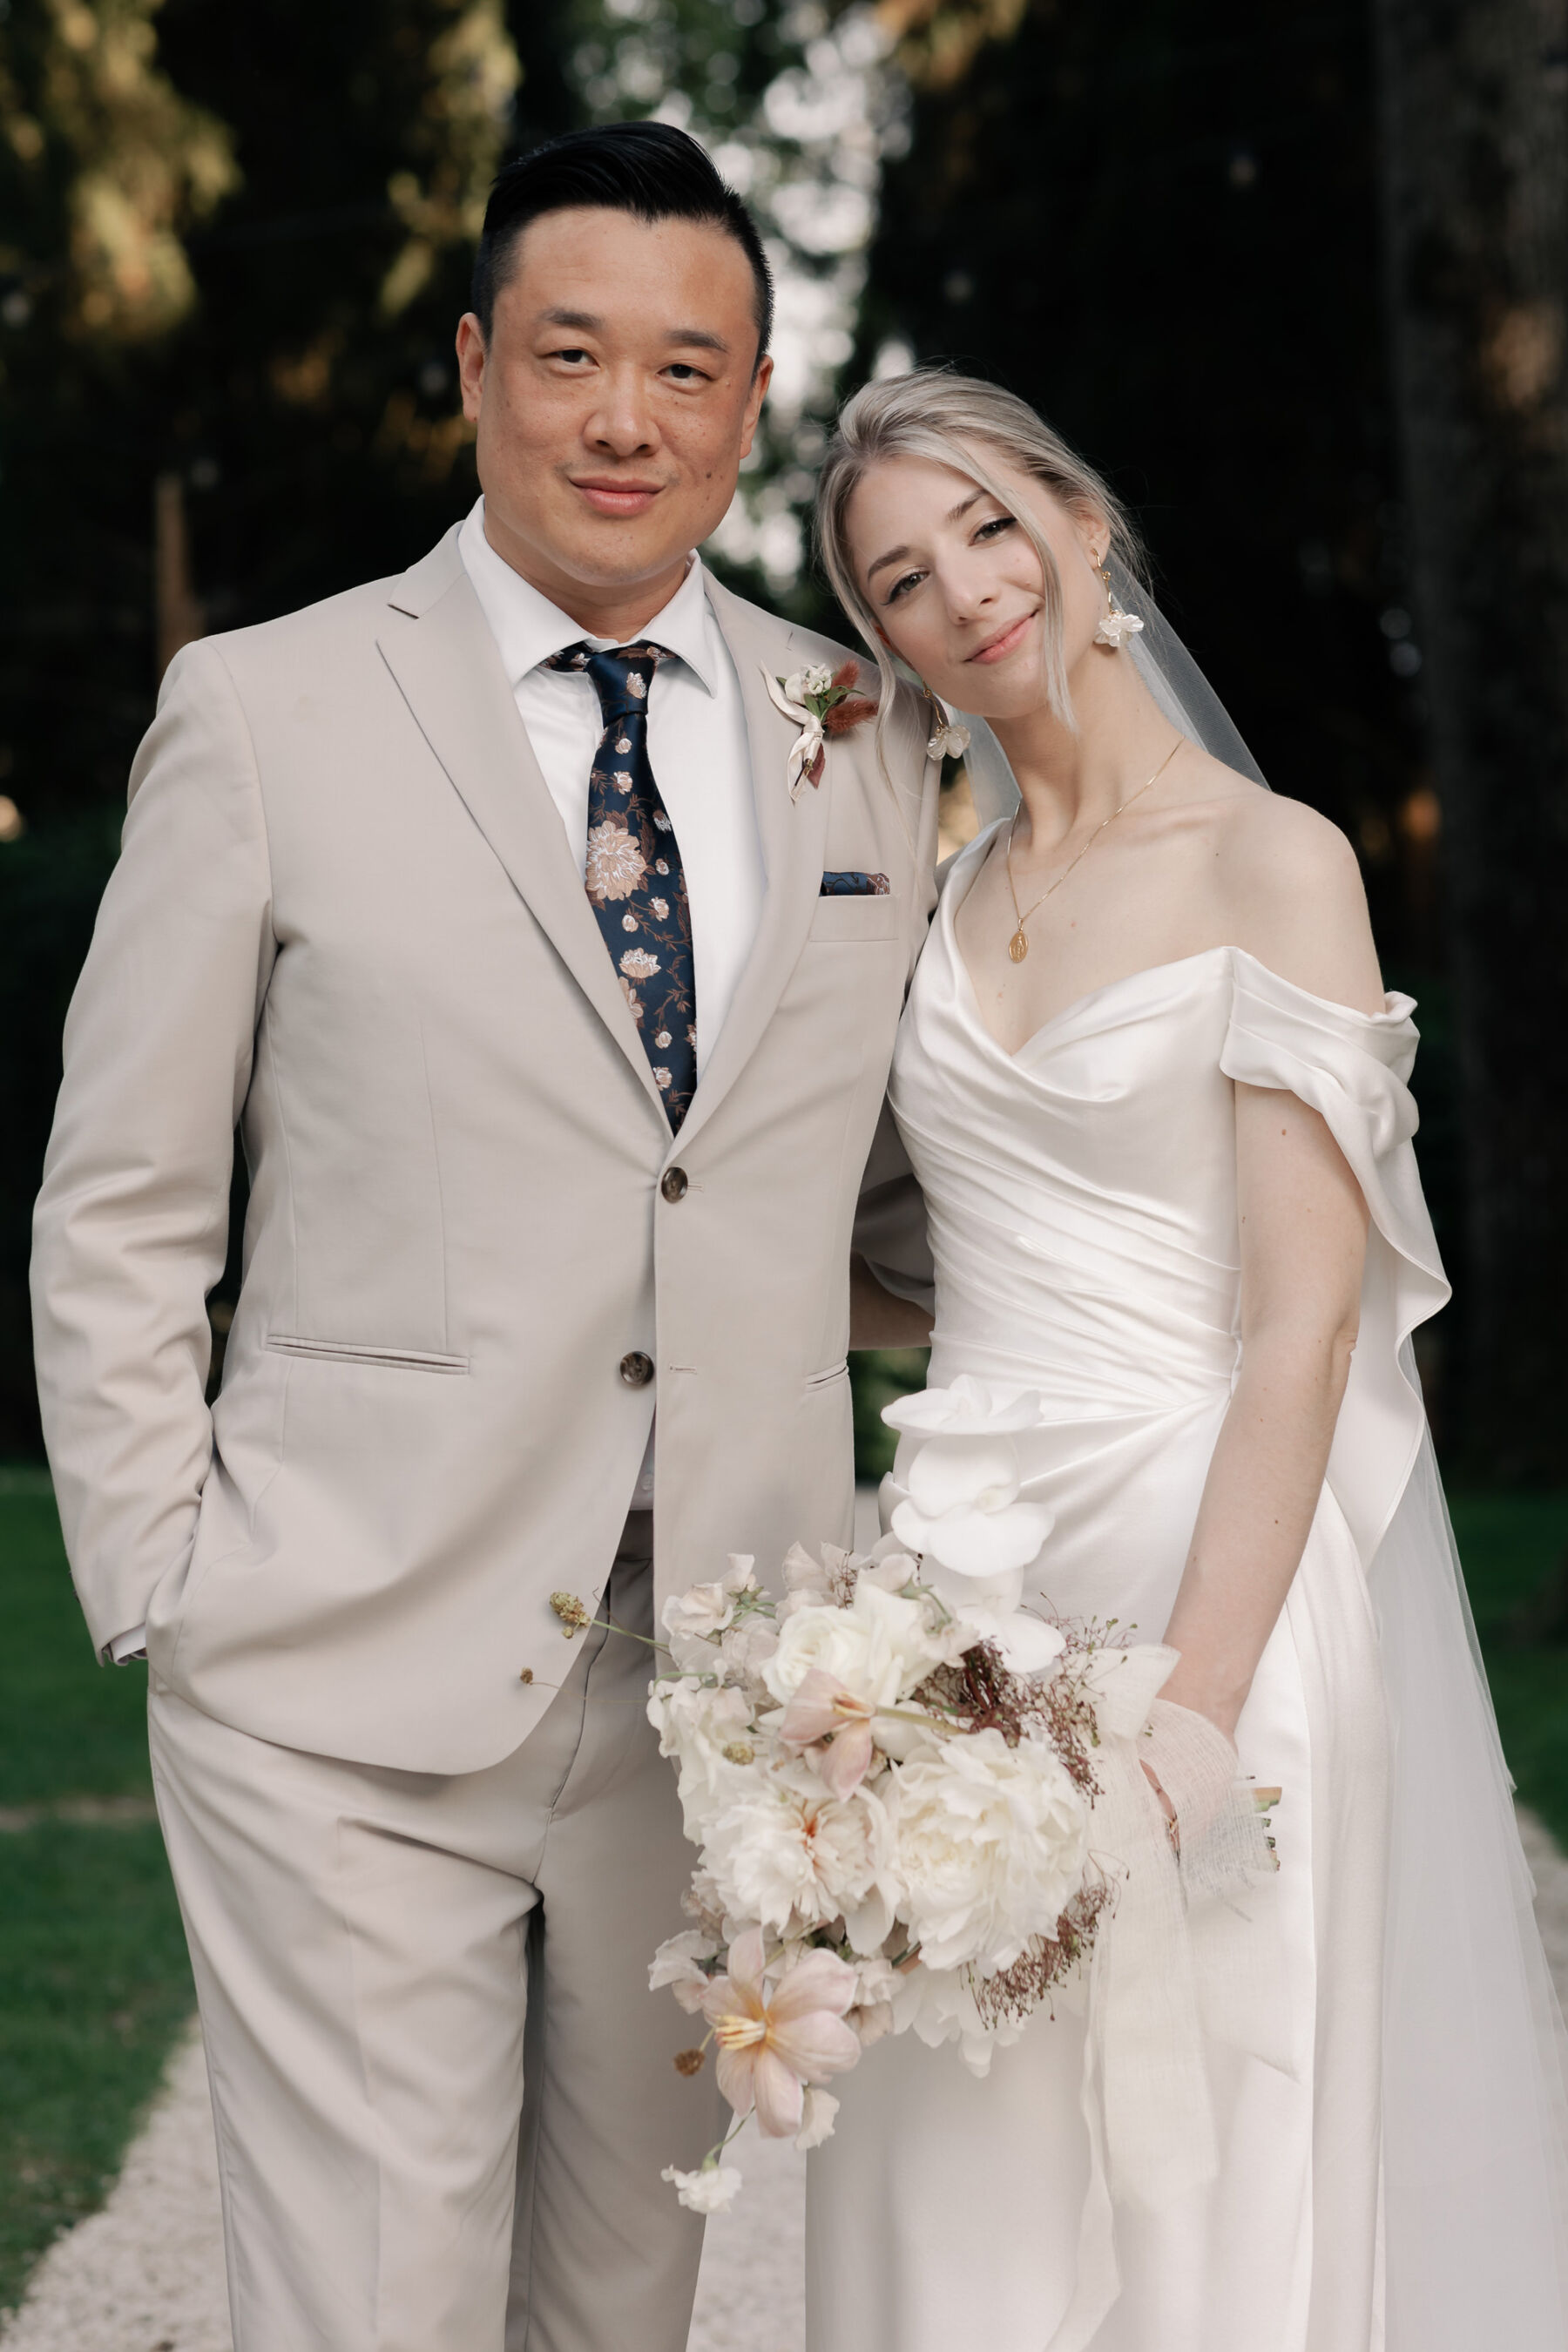 Groom in pale Indochino suit and floral tie. Bride leaning into him wearing an asymmetrical silk dress by Katherine Tash and carrying an organic and unstructured modern bridal bouquet. Bride wears her hair up in a simple French twist.